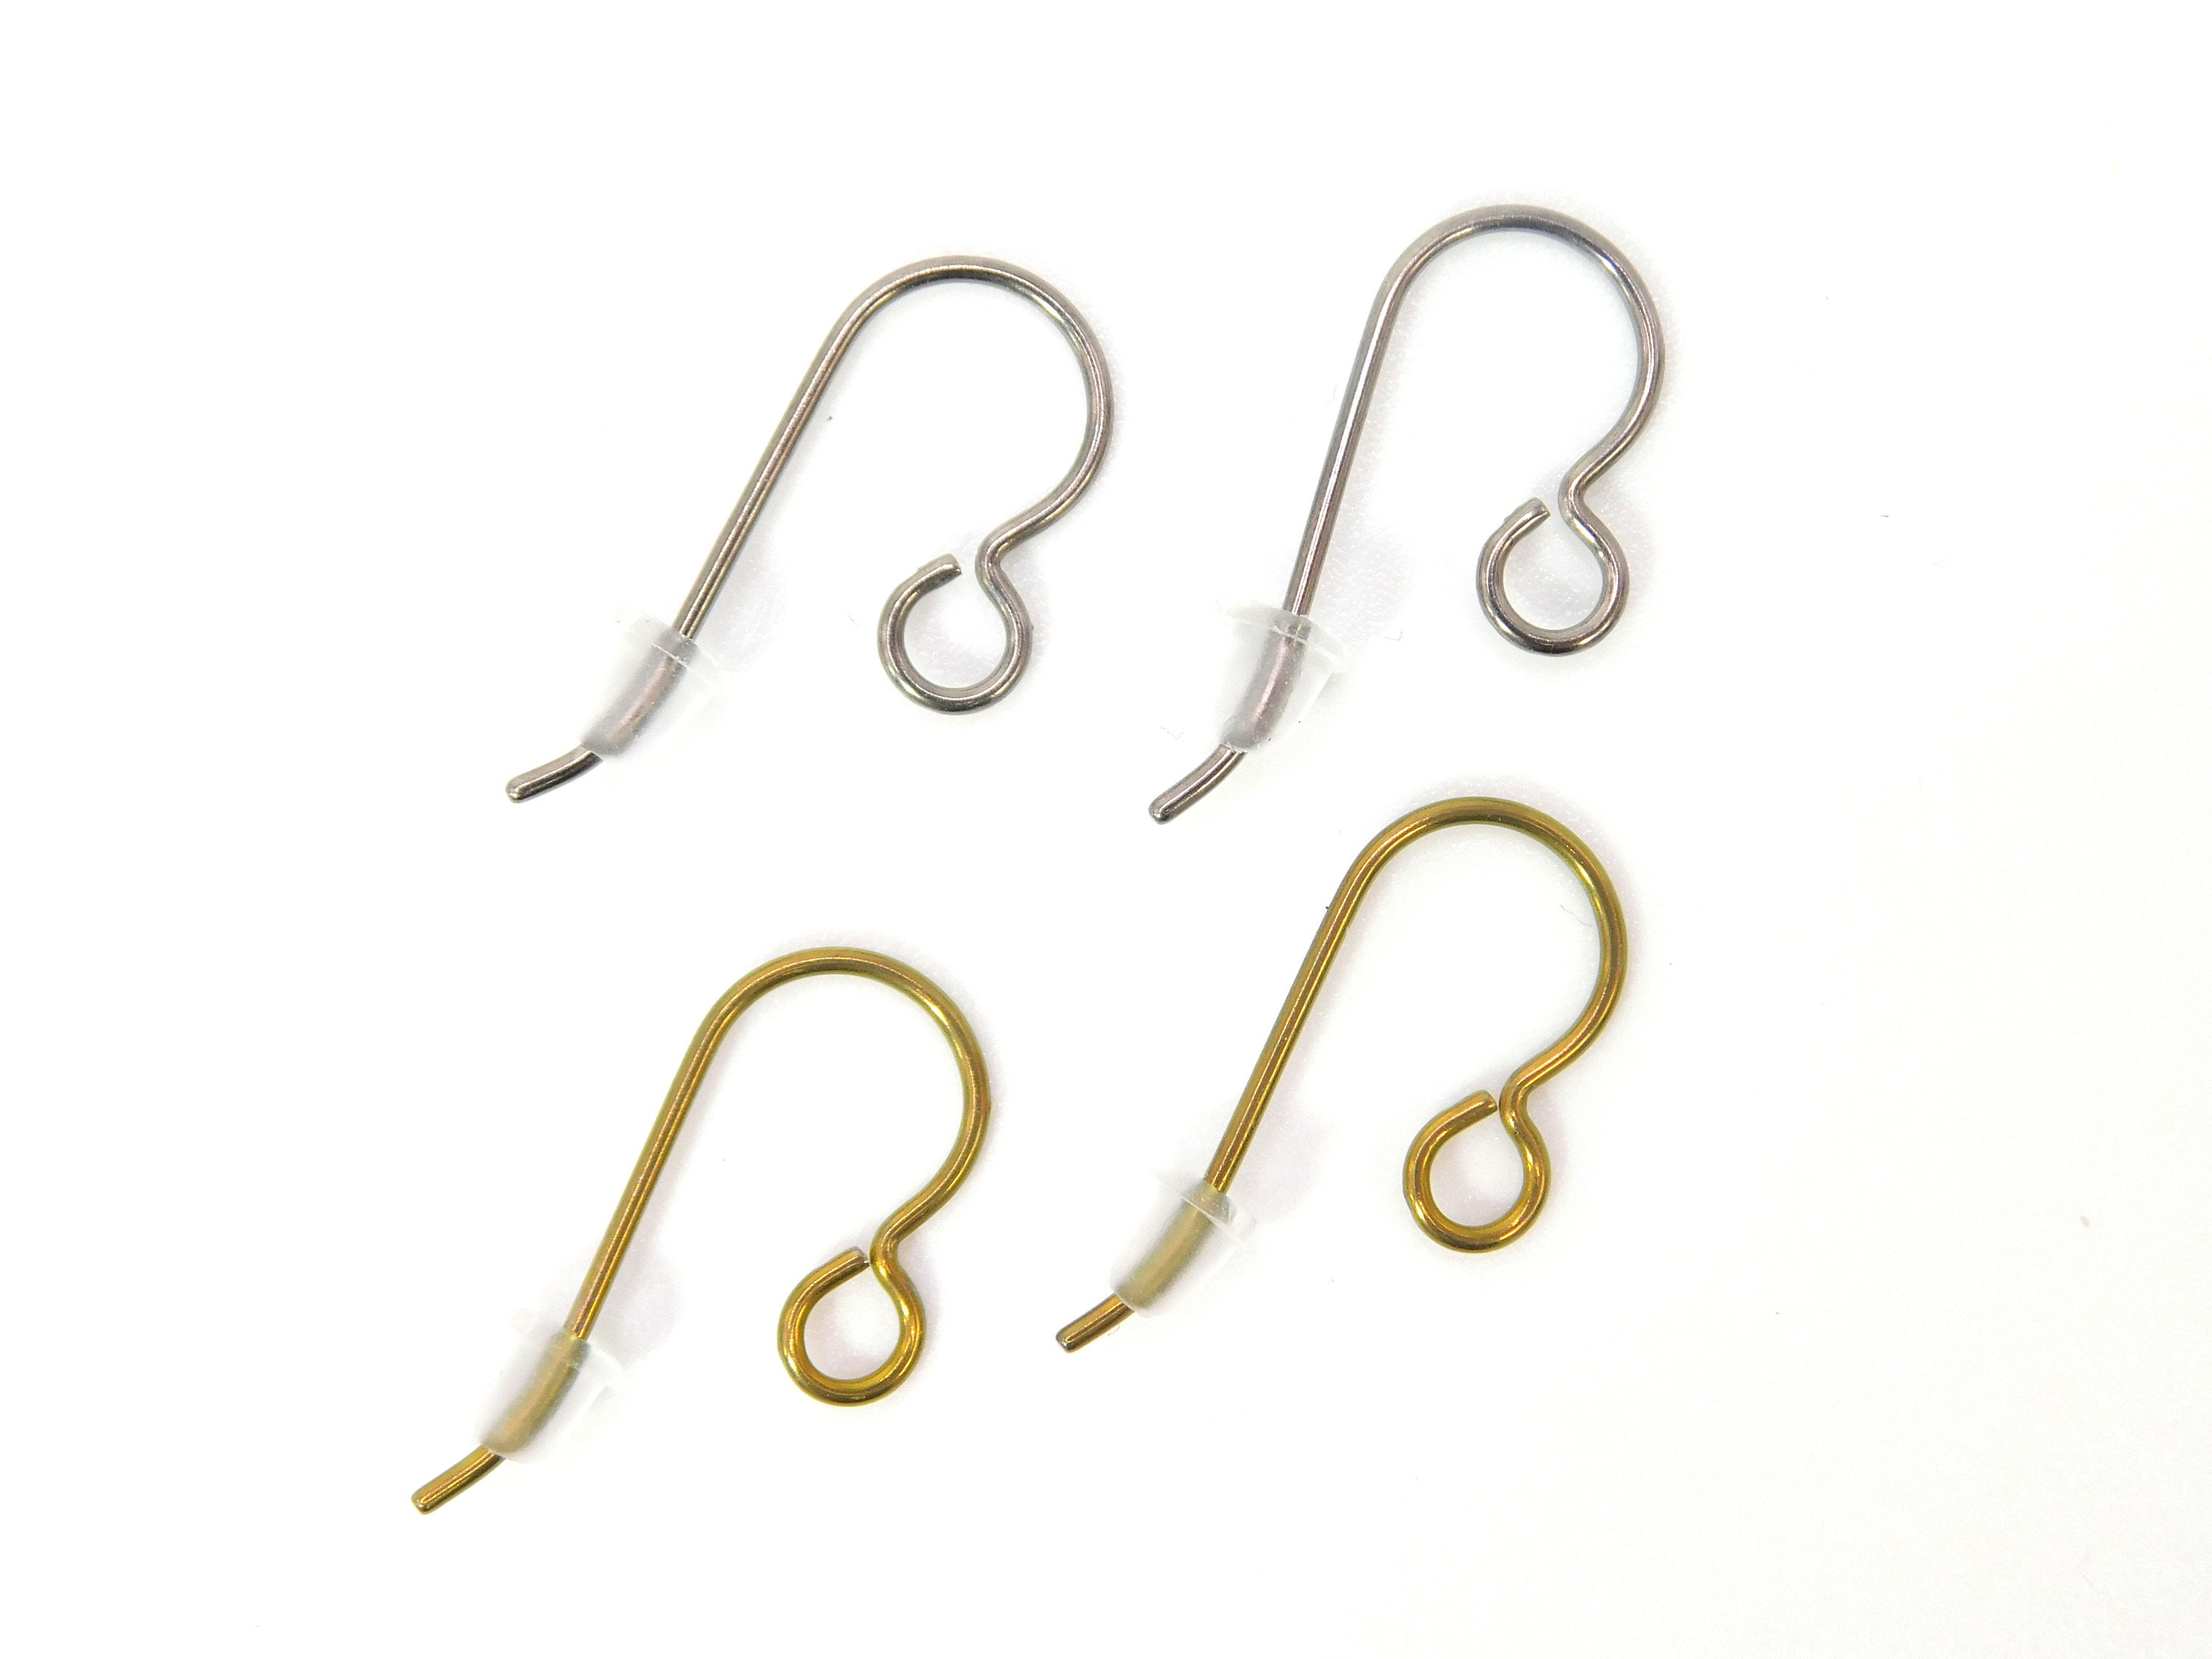 Handmade GOLD Ornament Hooks, 18 Gauge Wire Hooks 1.25 Inches Long